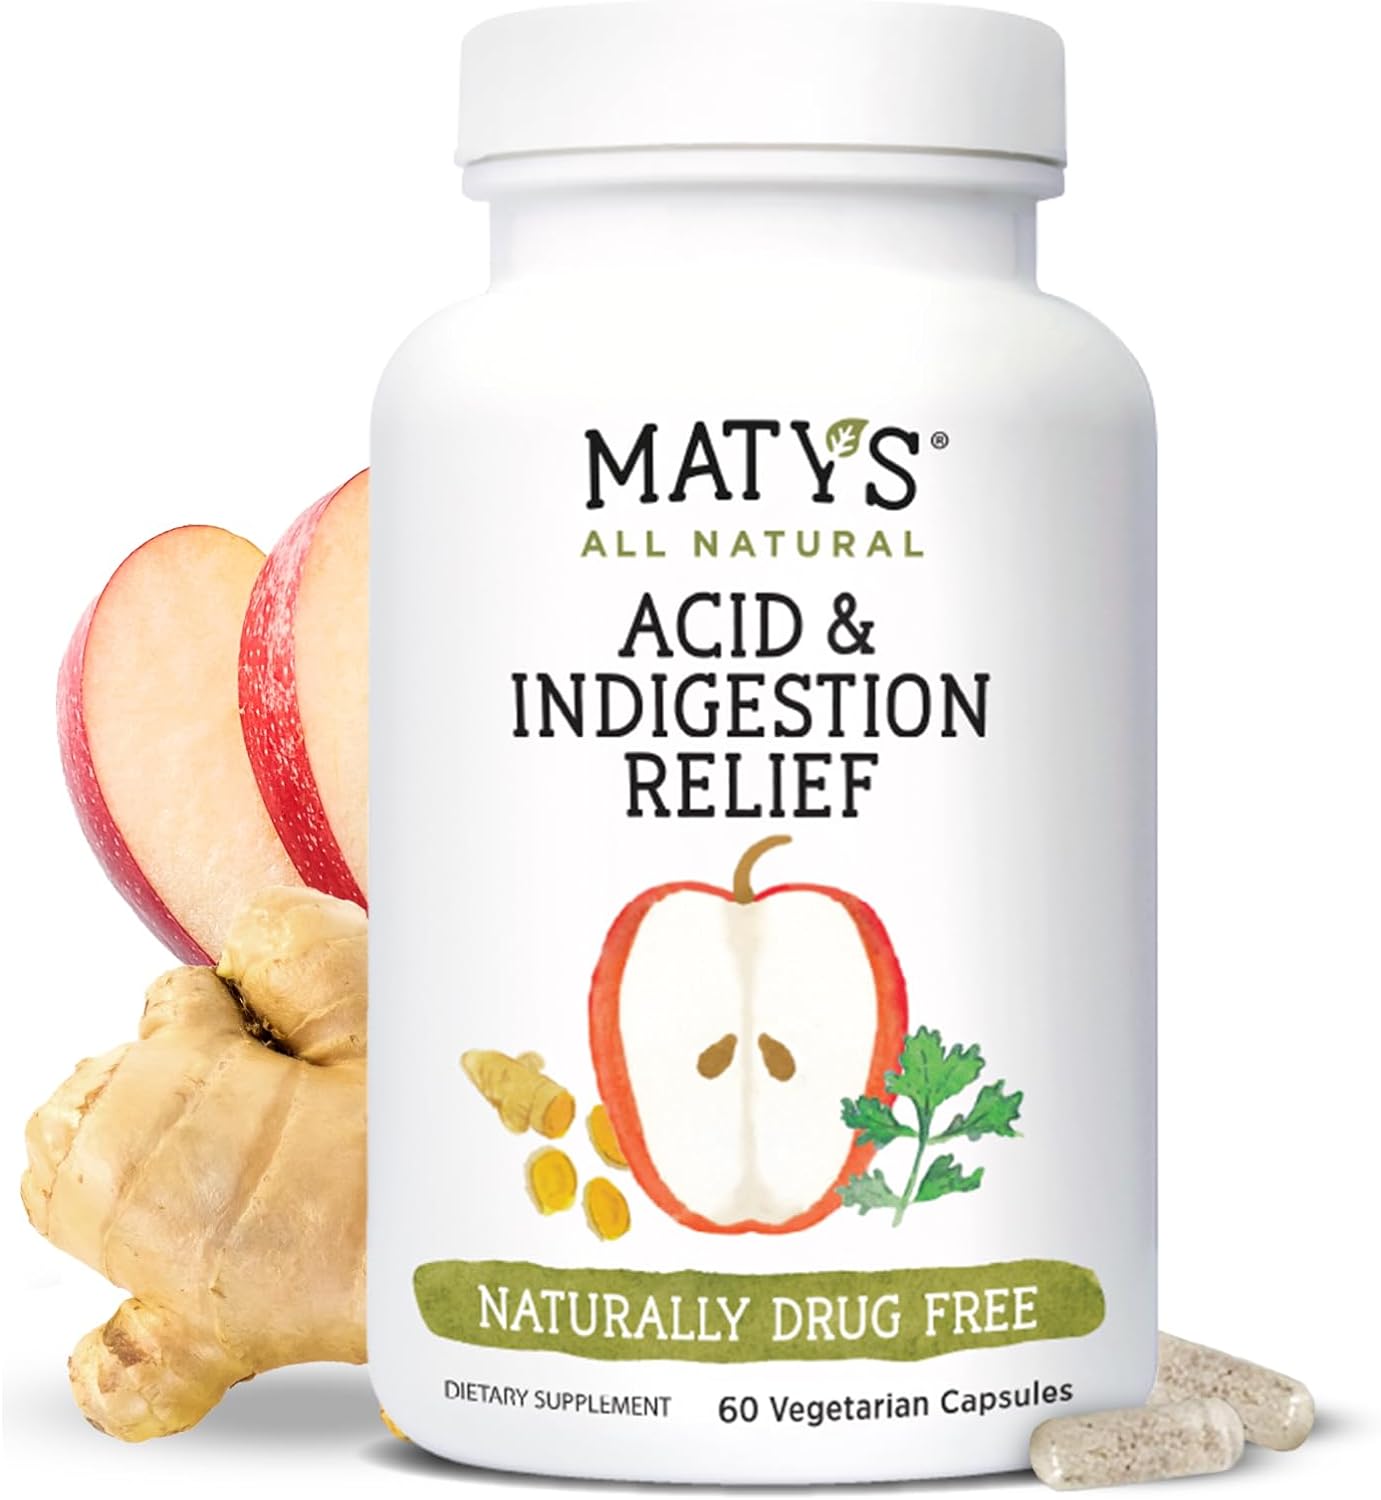 Matys Acid & Indigestion Relief Capsules, Safe Antacid Alternative for Occasional Acid Reflux & Heartburn, Made with Apple Cider Vinegar, Soy & Gluten Free Vegetarian Capsules, 60 Count, 30 Servings